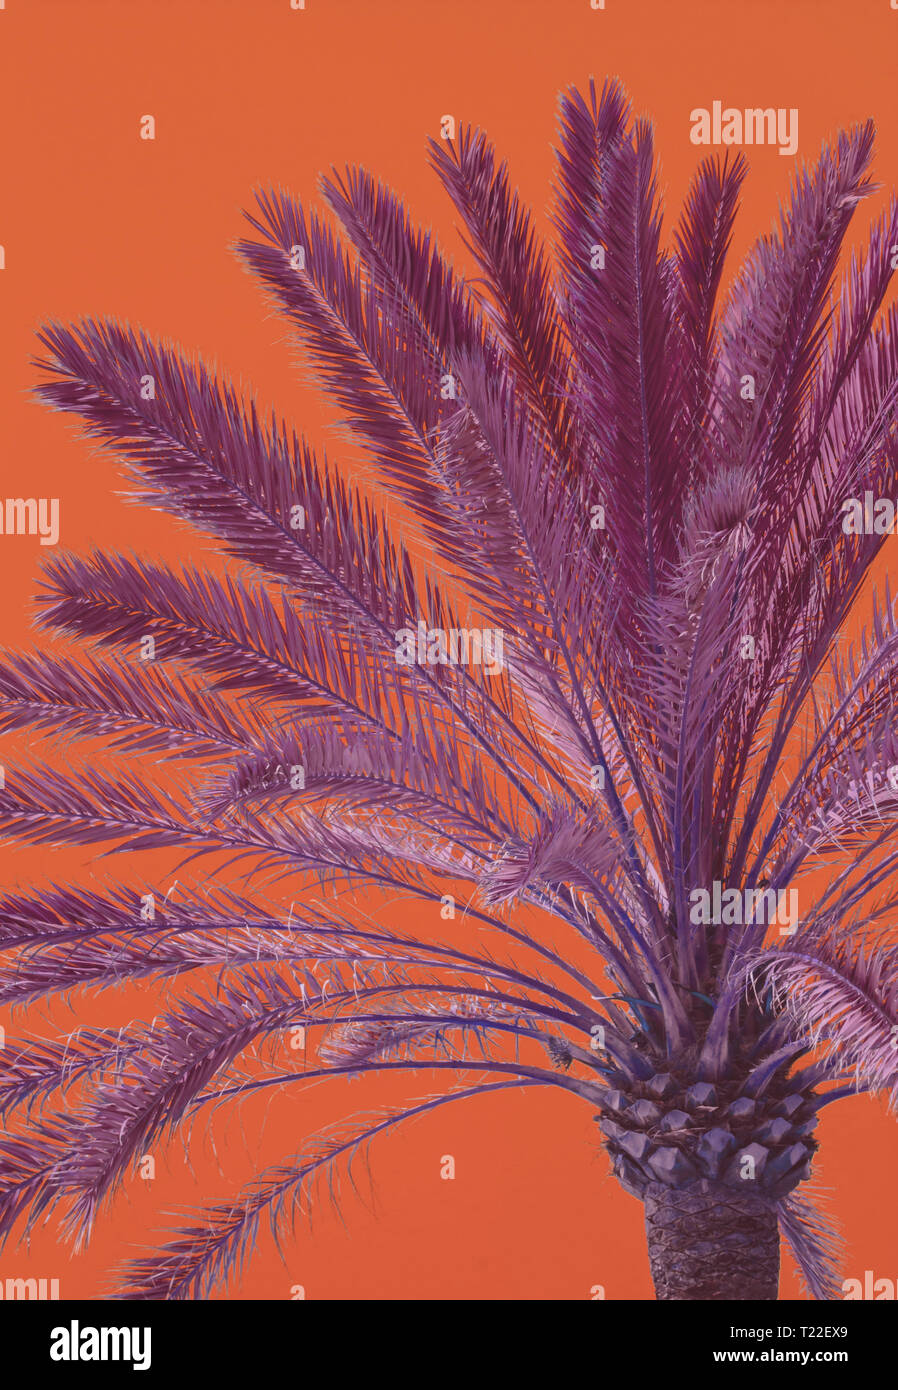 Vertical image of palm tree foliage closeup against Living Coral sky background Stock Photo